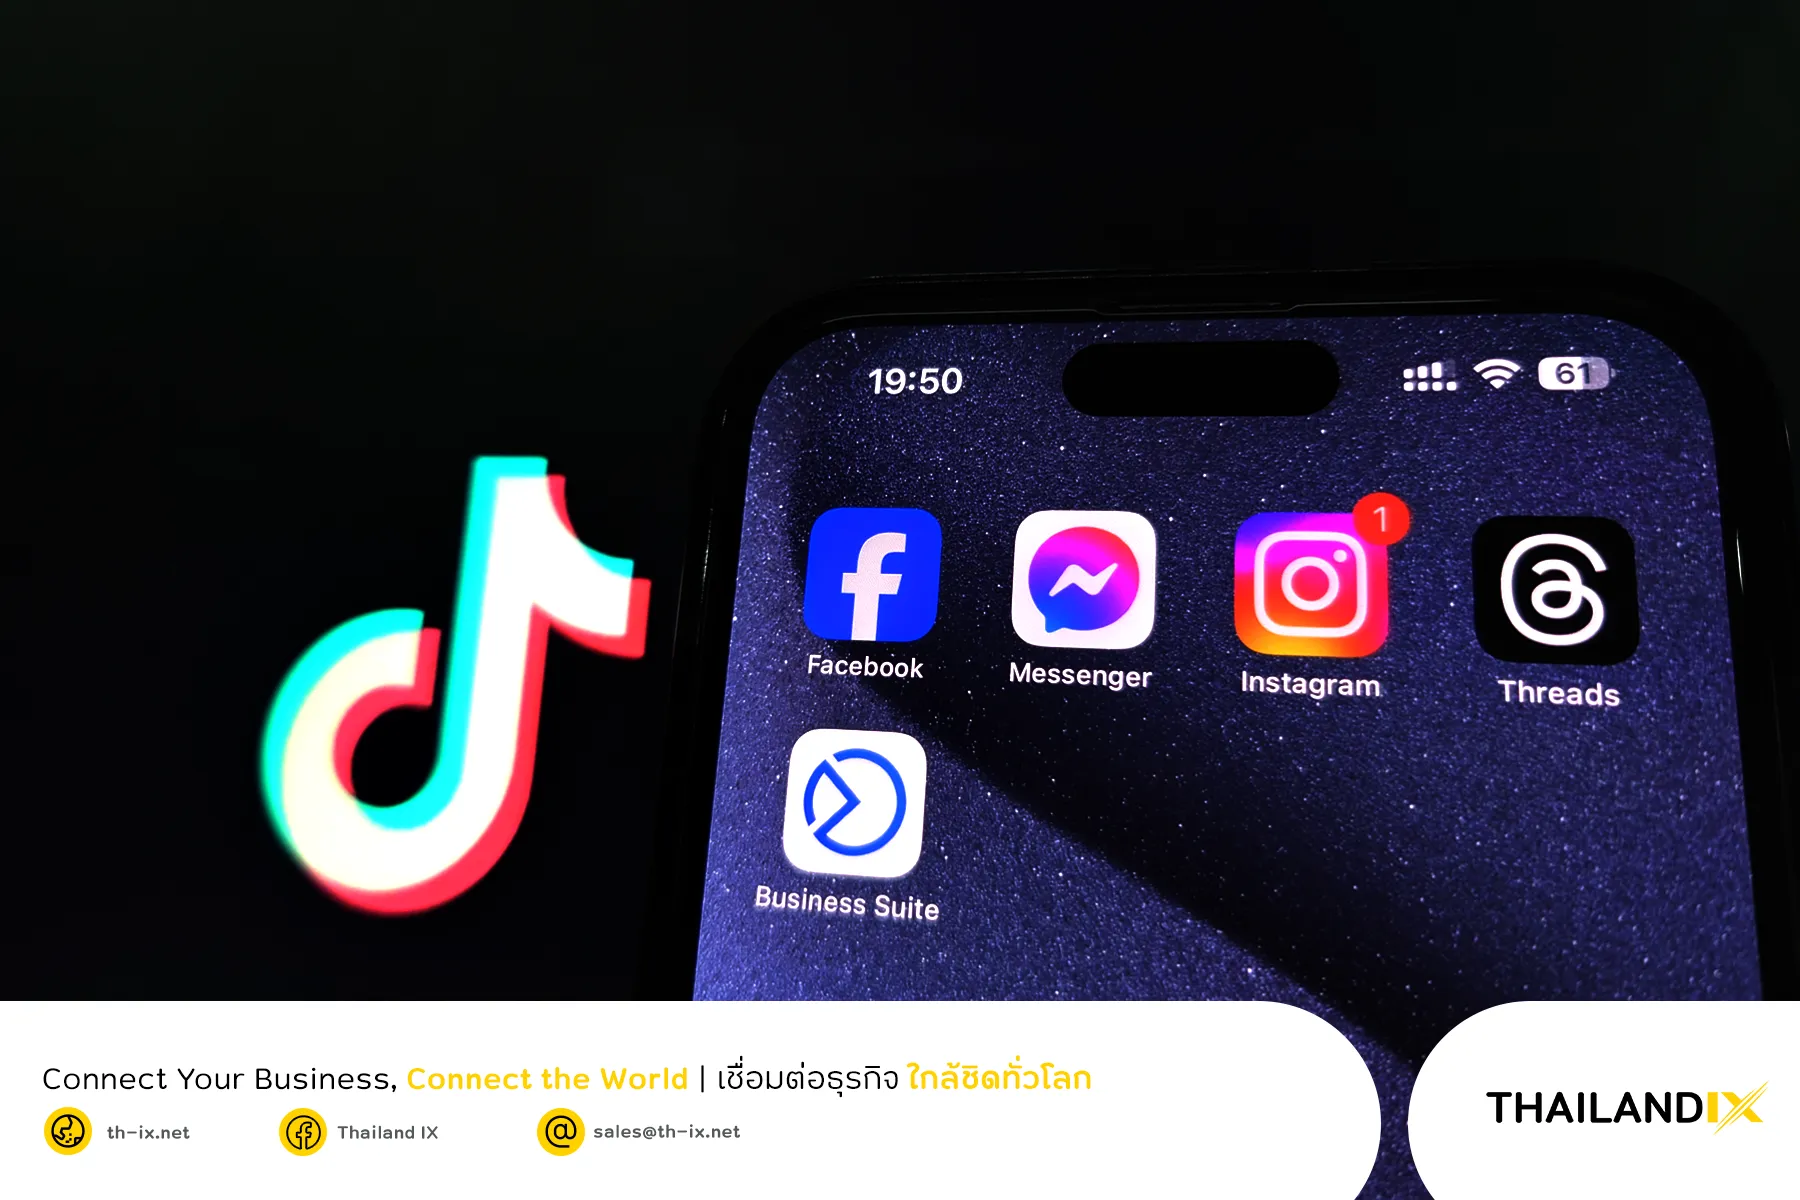 TikTok from ByteDance, and social media pltforms from Meta, including Facebook, Facebook Messenger, Instagram, and Threads by Instagram.